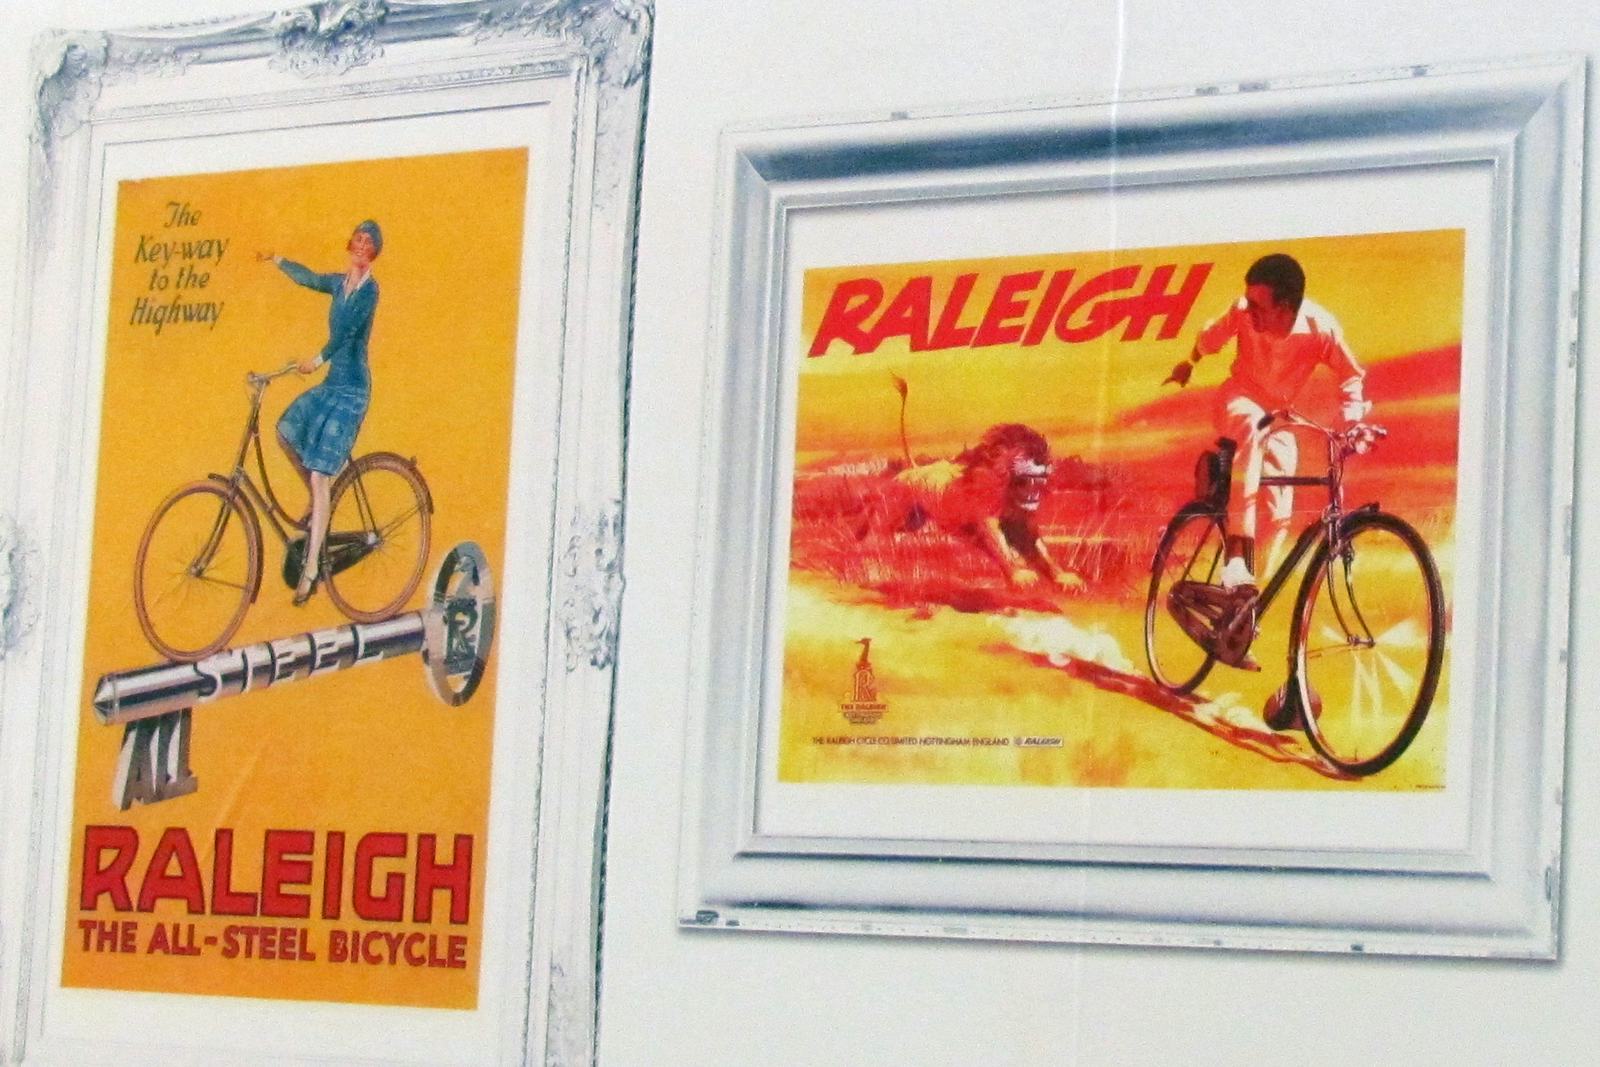 125 year old Raleigh pops up as best known bicycle brand in the category Sportswear & Equipment. - Photo Bike Europe
